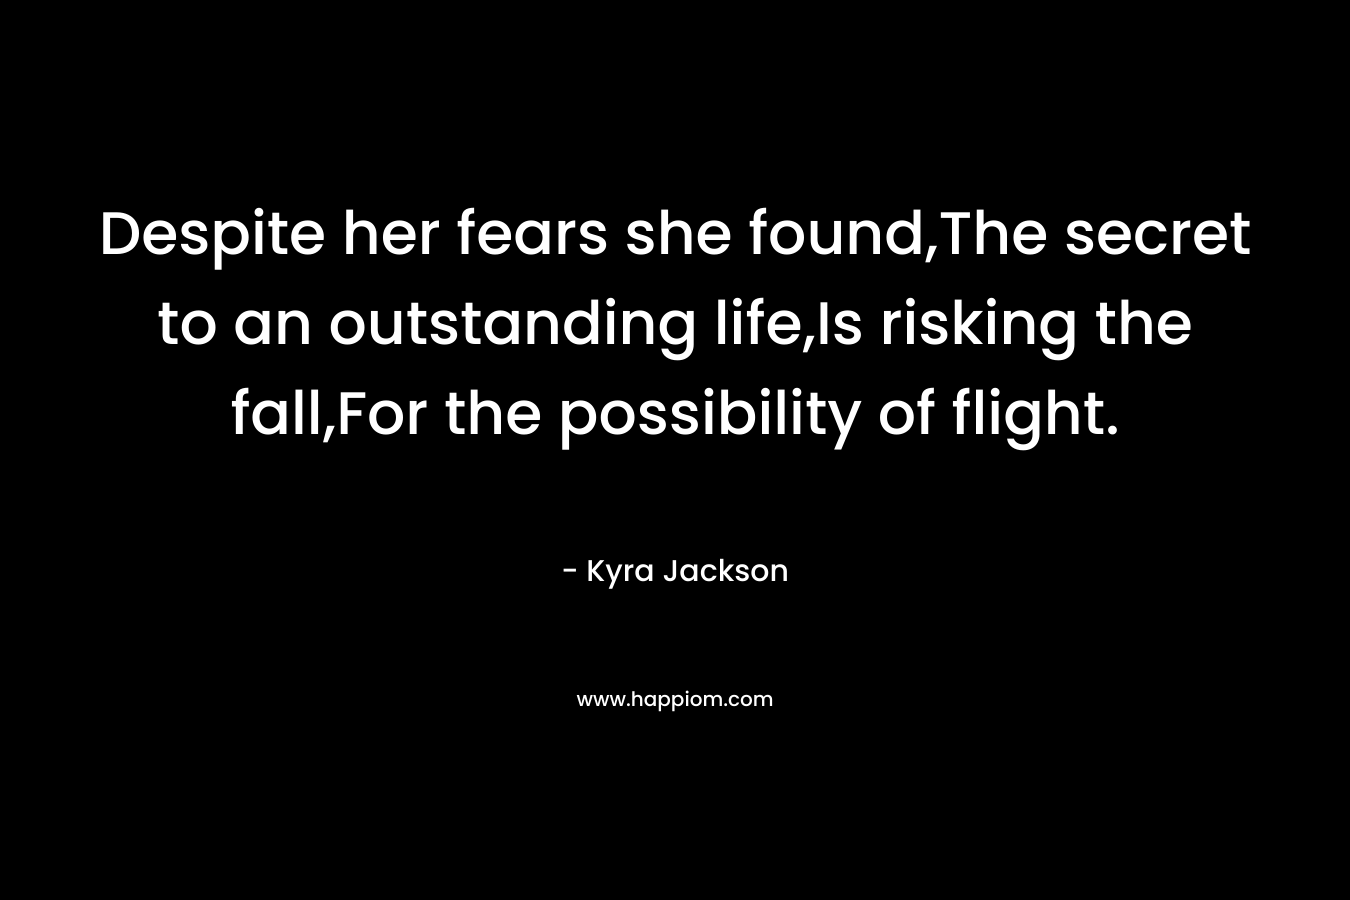 Despite her fears she found,The secret to an outstanding life,Is risking the fall,For the possibility of flight.